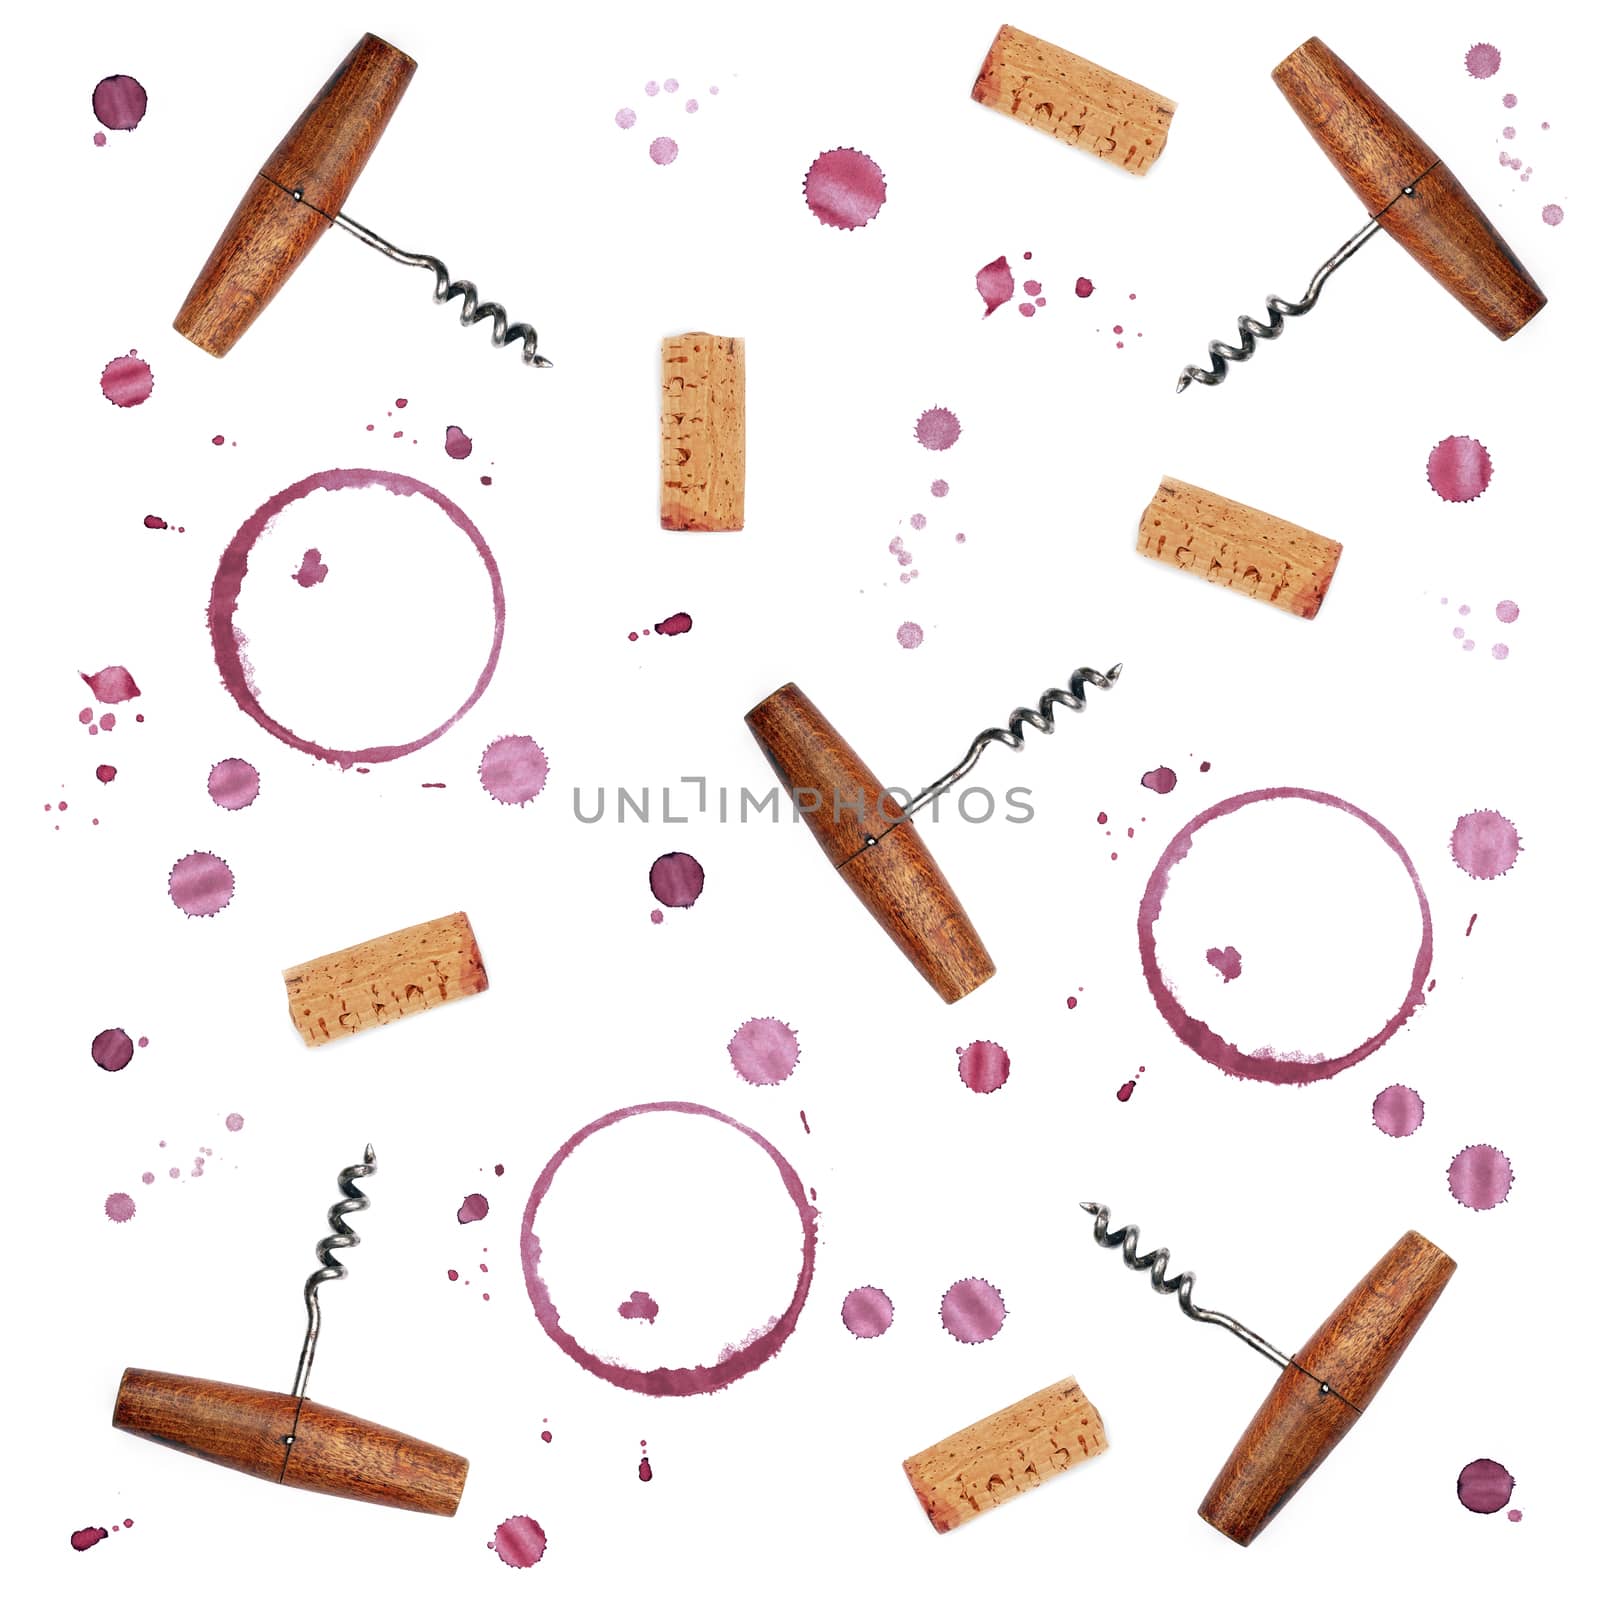 Pattern of red wine ring stains, corks and openers by BreakingTheWalls